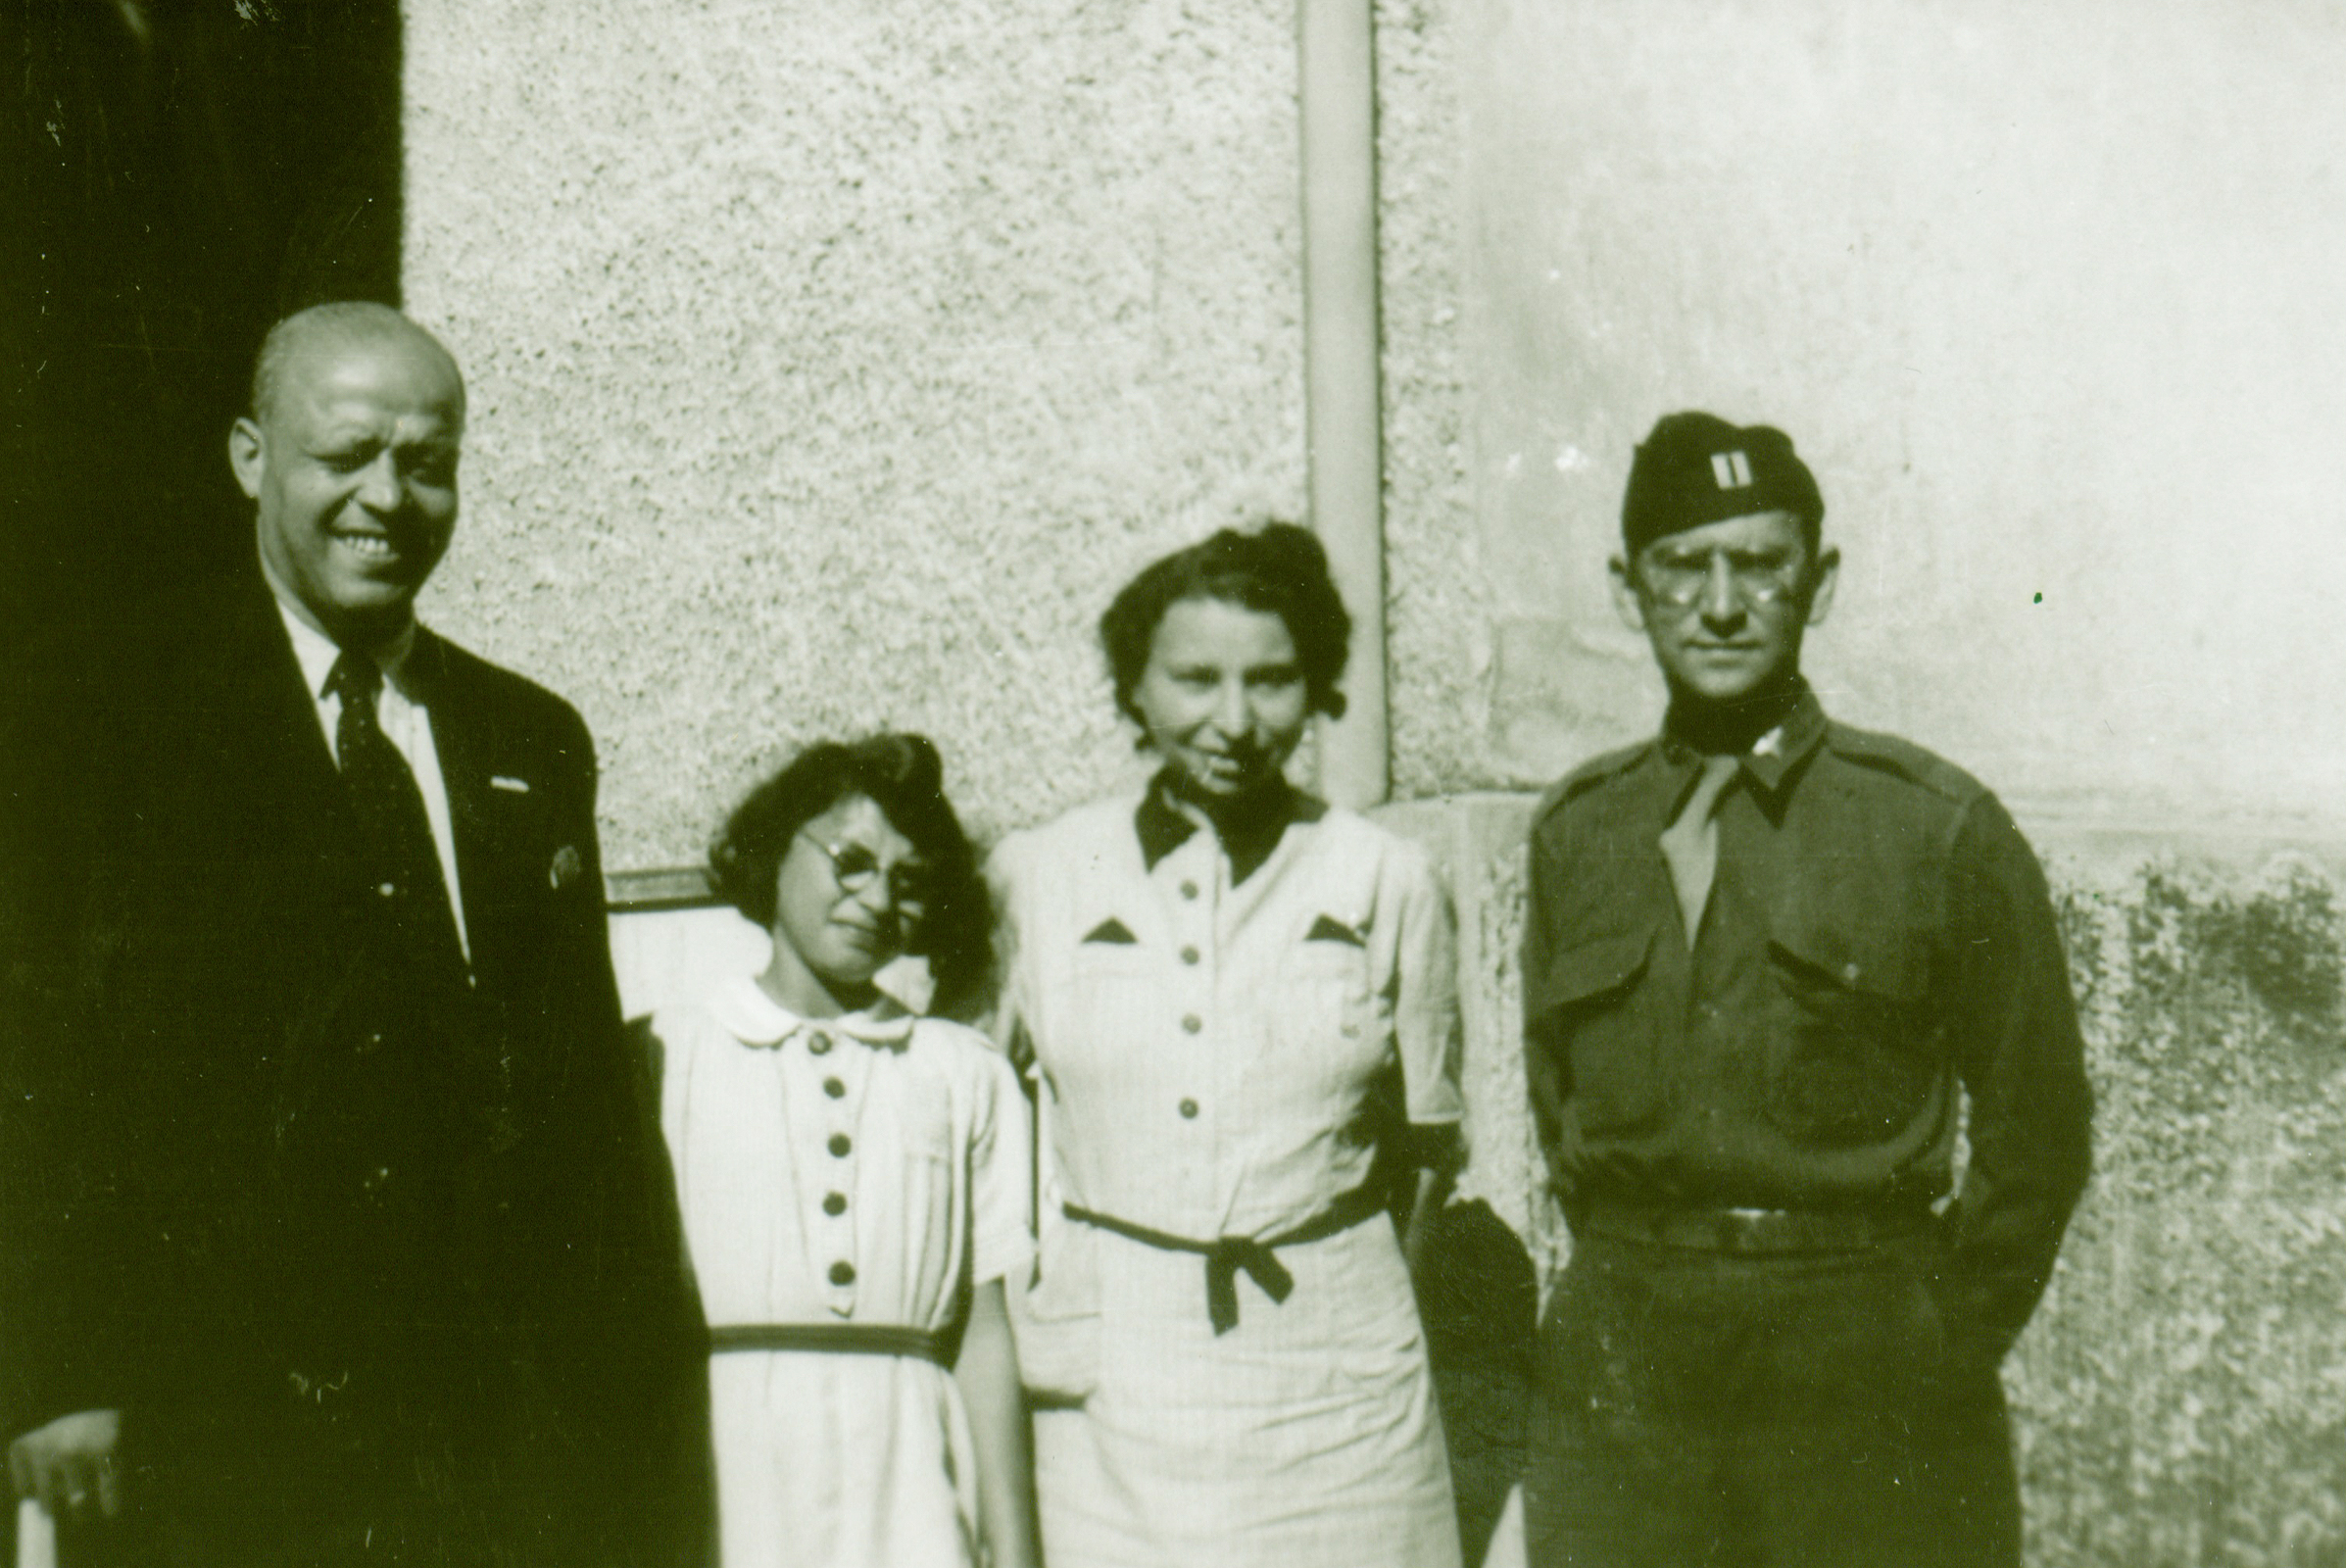 With an American friend after the liberation in Jebenhausen.